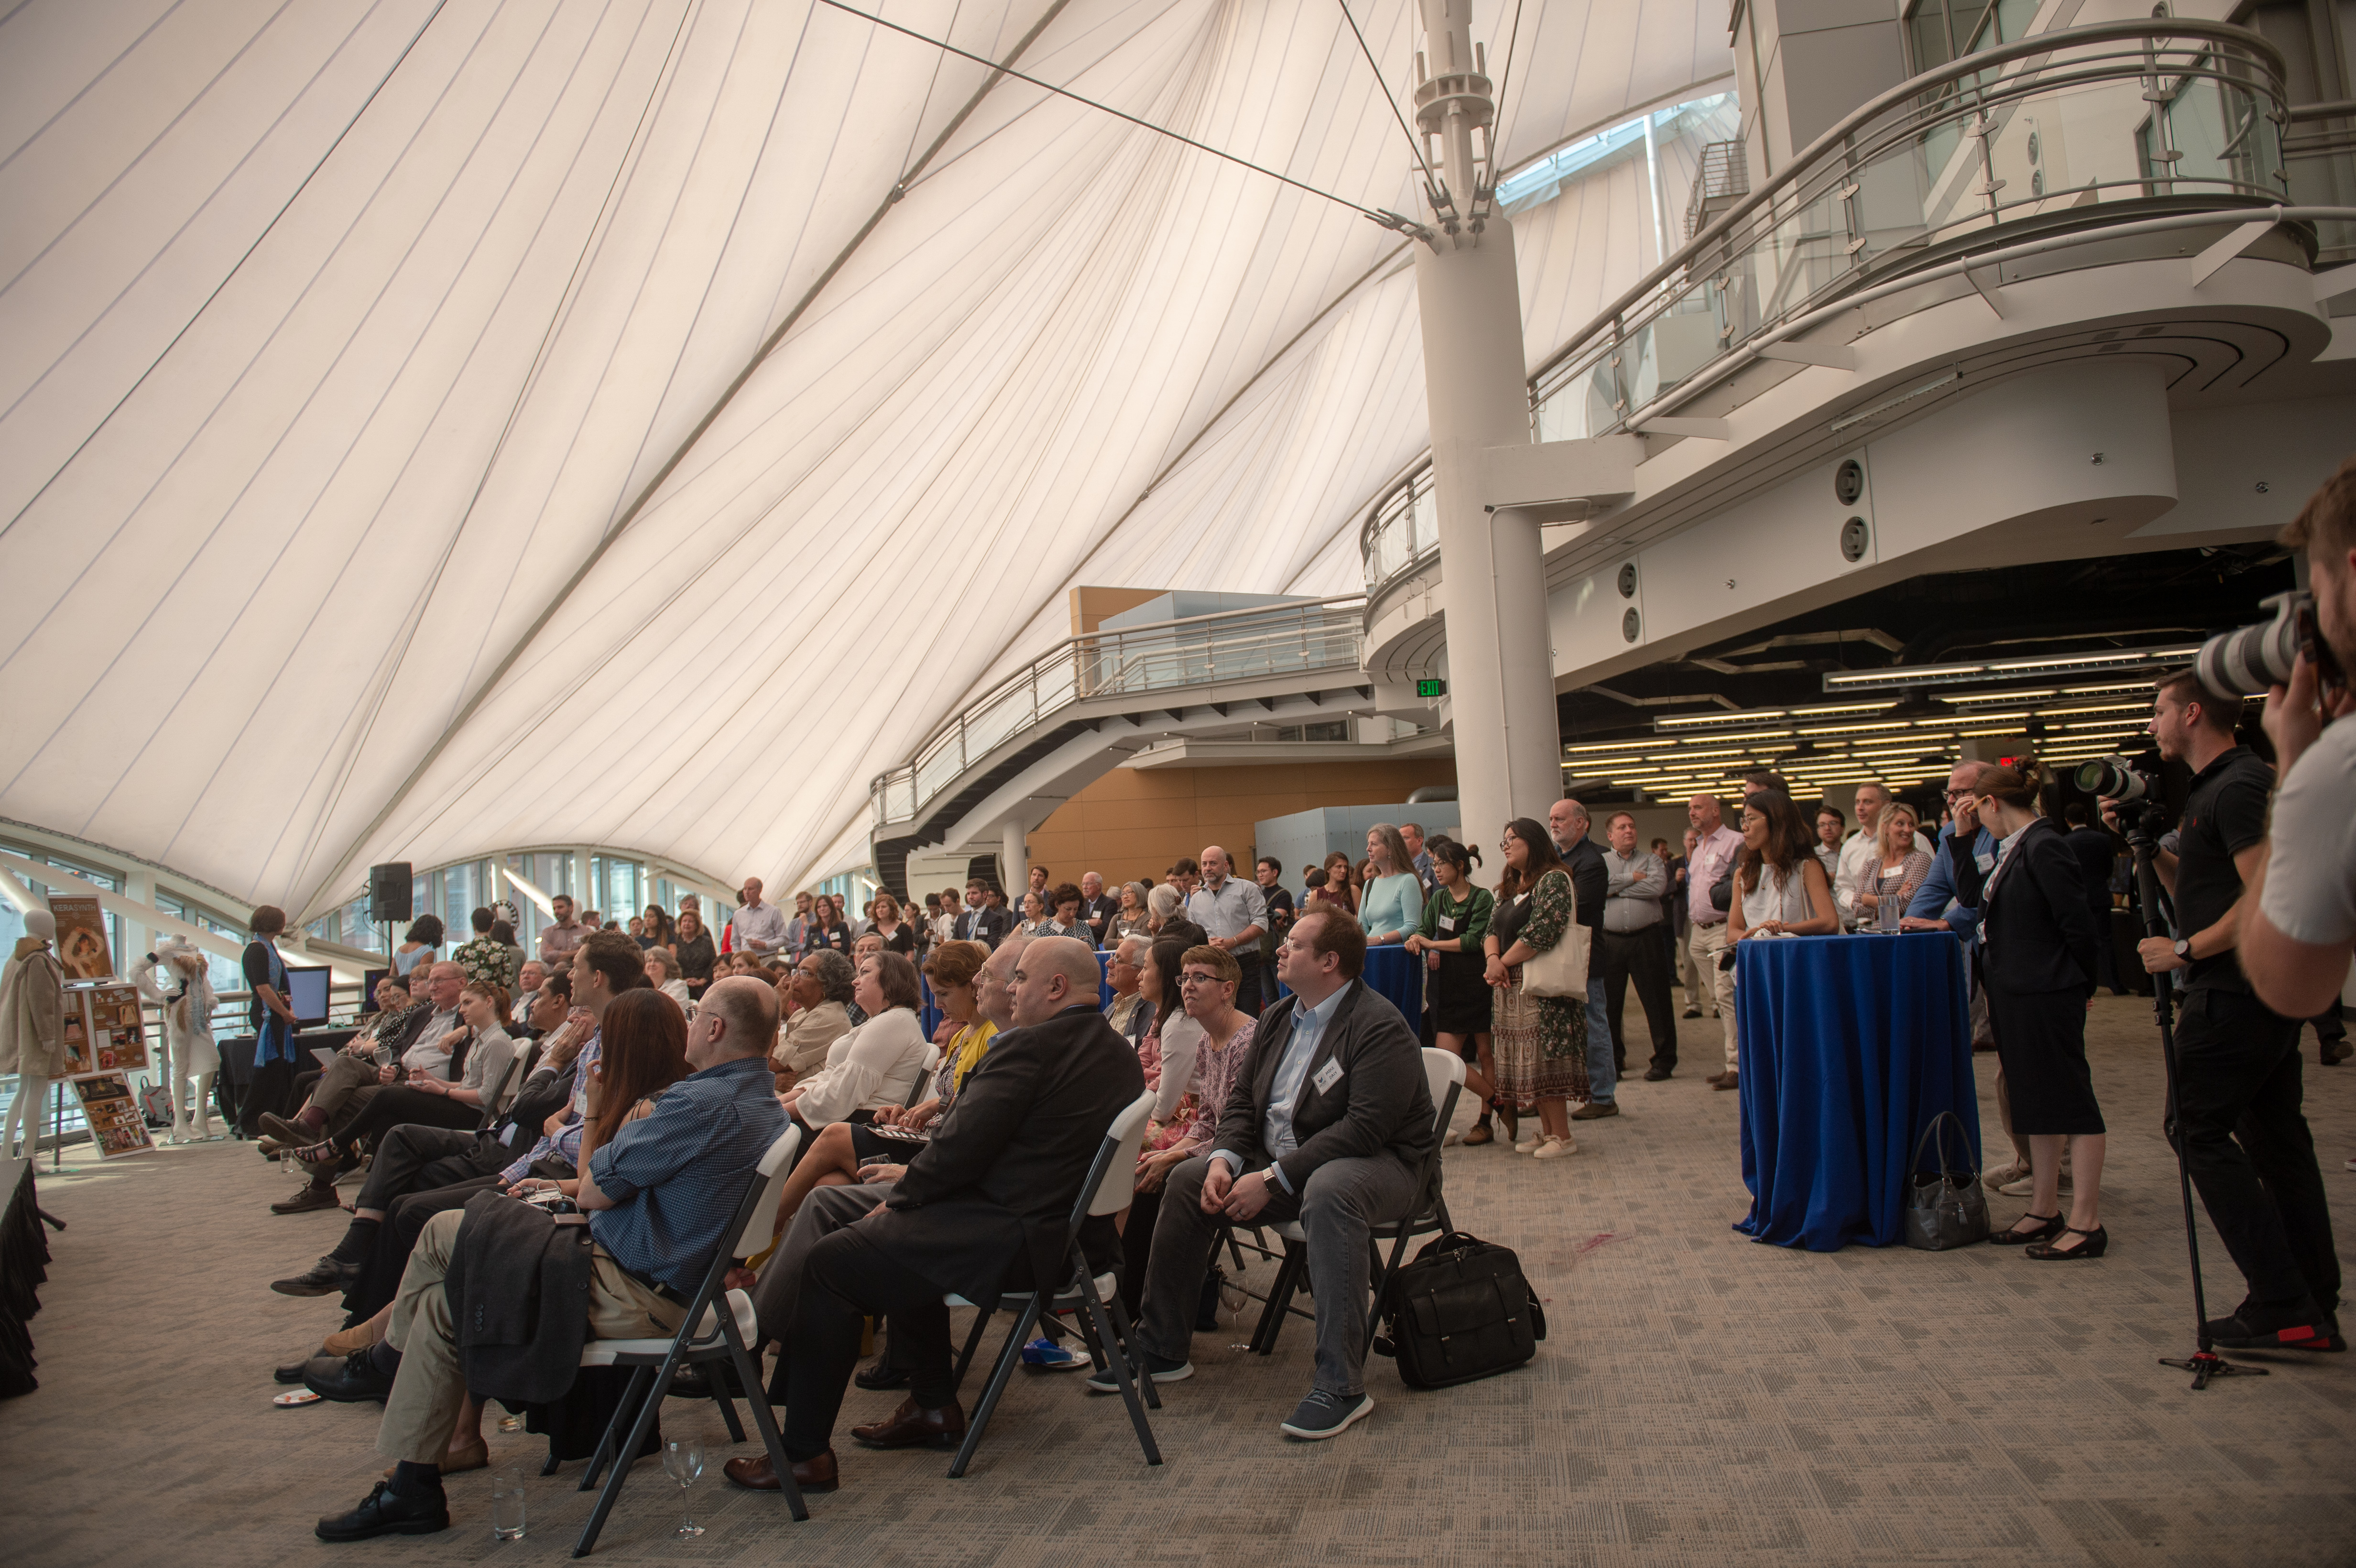 Attendees learned how Baltimore companies are bringing smart garments, technical textiles and wearables to market.